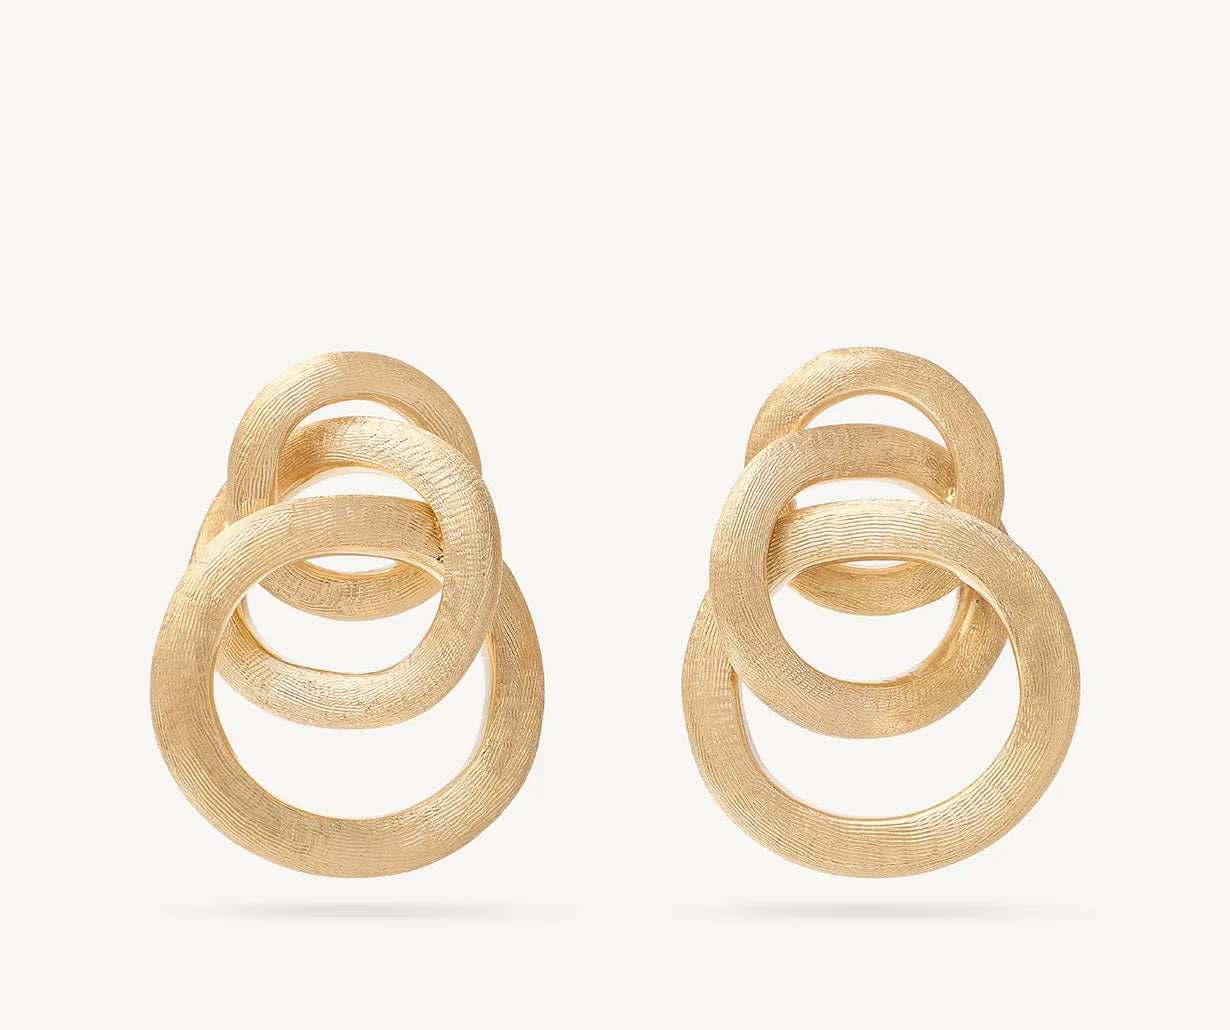 18K YELLOW GOLD SATIN FINISHED EARRINGS FROM THE JAIPUR COLLECTION